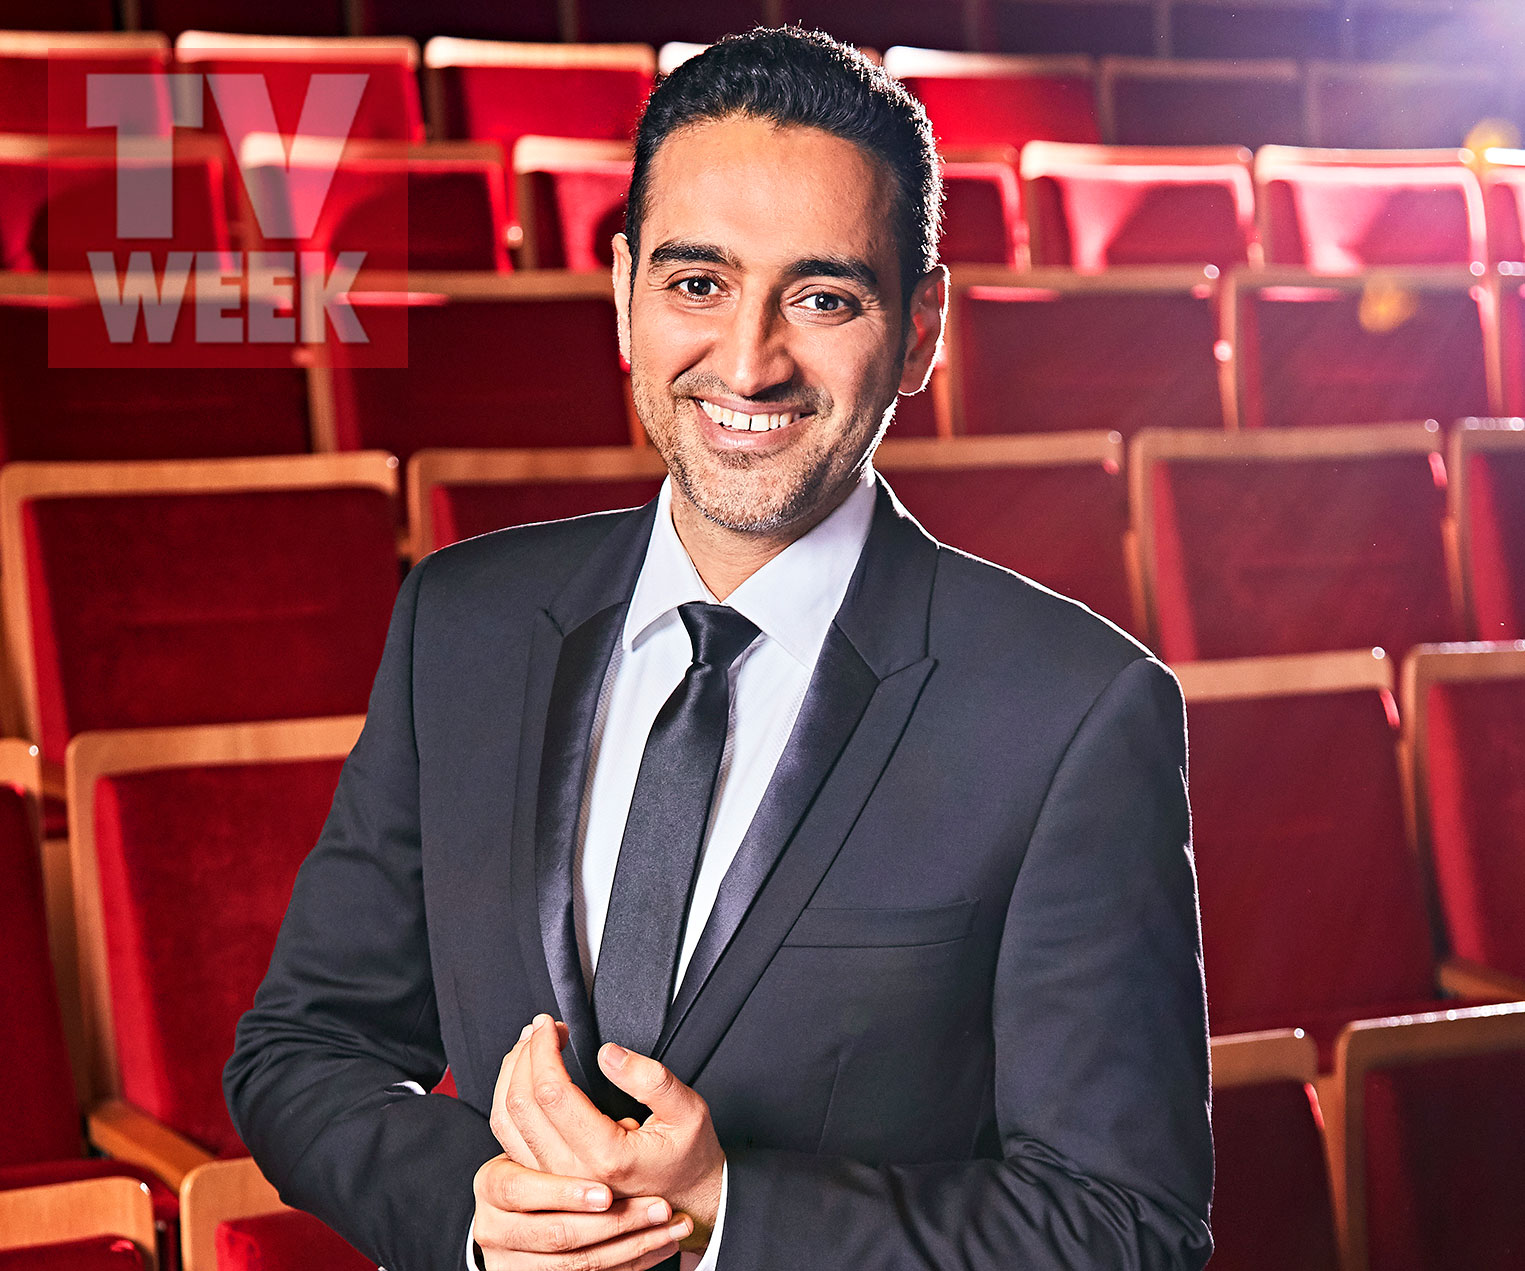 Waleed Aly doesn’t consider himself a Logie type of guy, but three Gold Nominations suggest the public certainly think he is